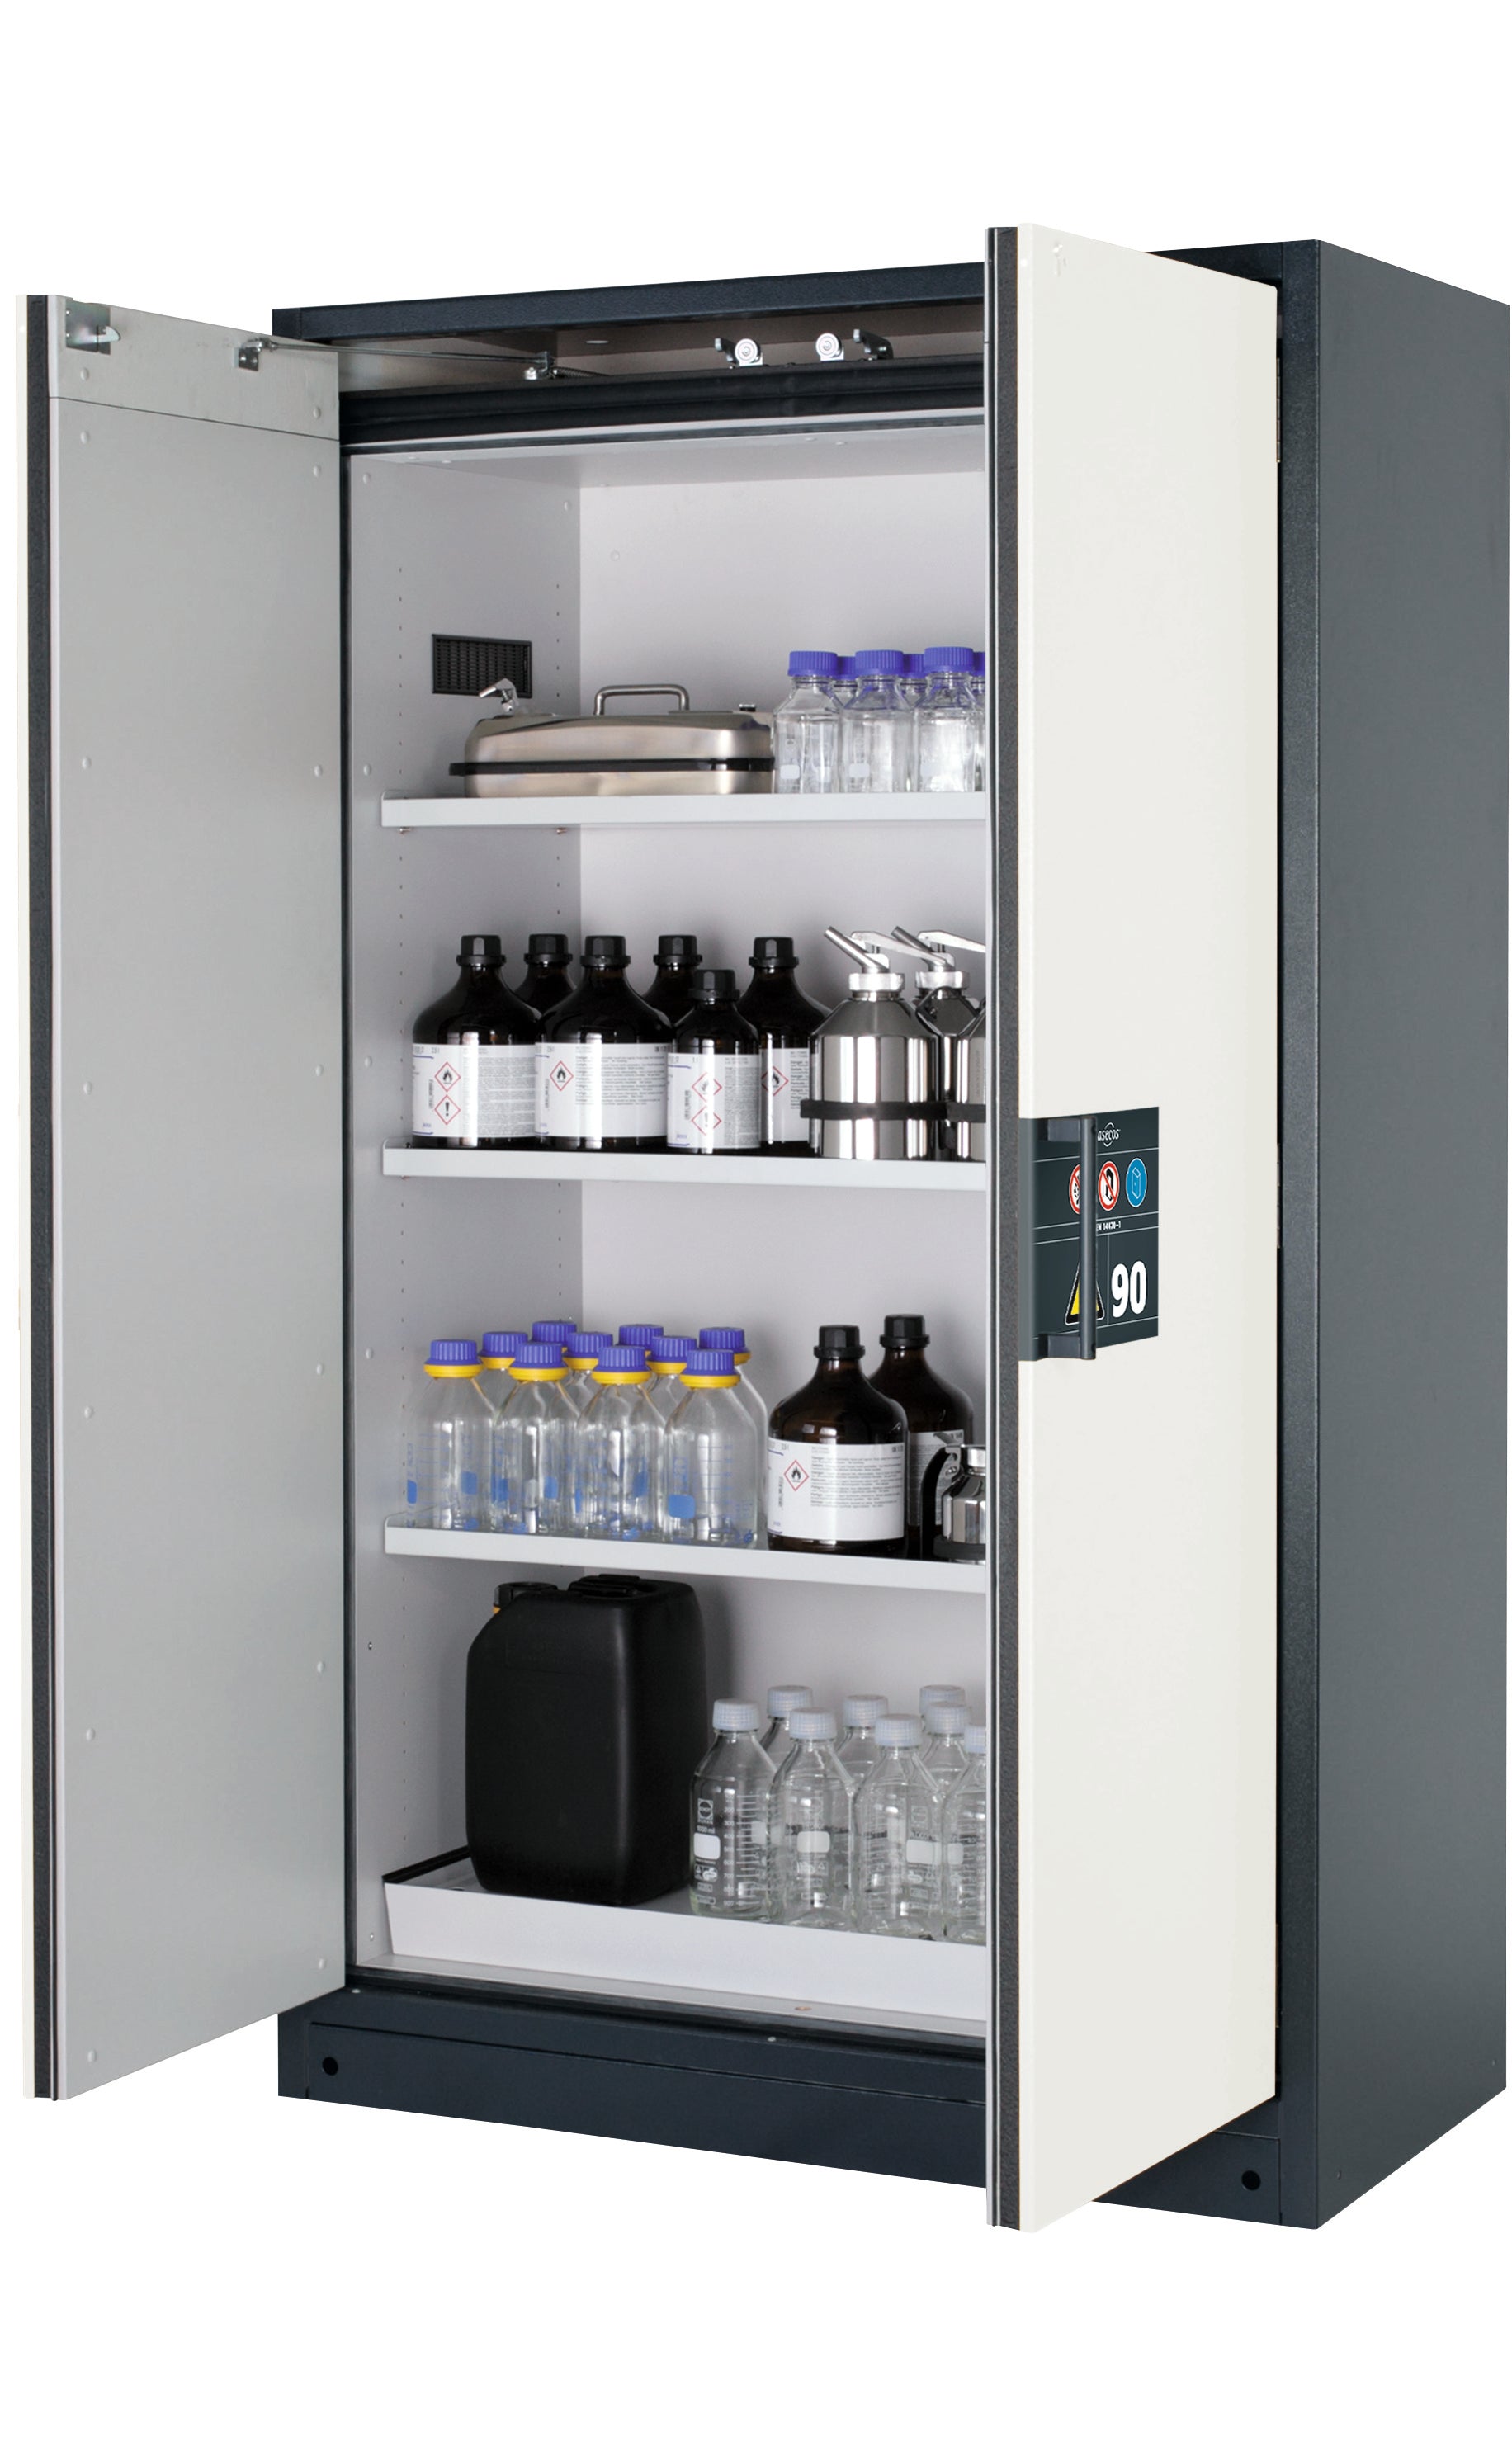 Type 90 safety storage cabinet Q-CLASSIC-90 model Q90.195.120 in pure white RAL 9010 with 3x shelf standard (sheet steel),